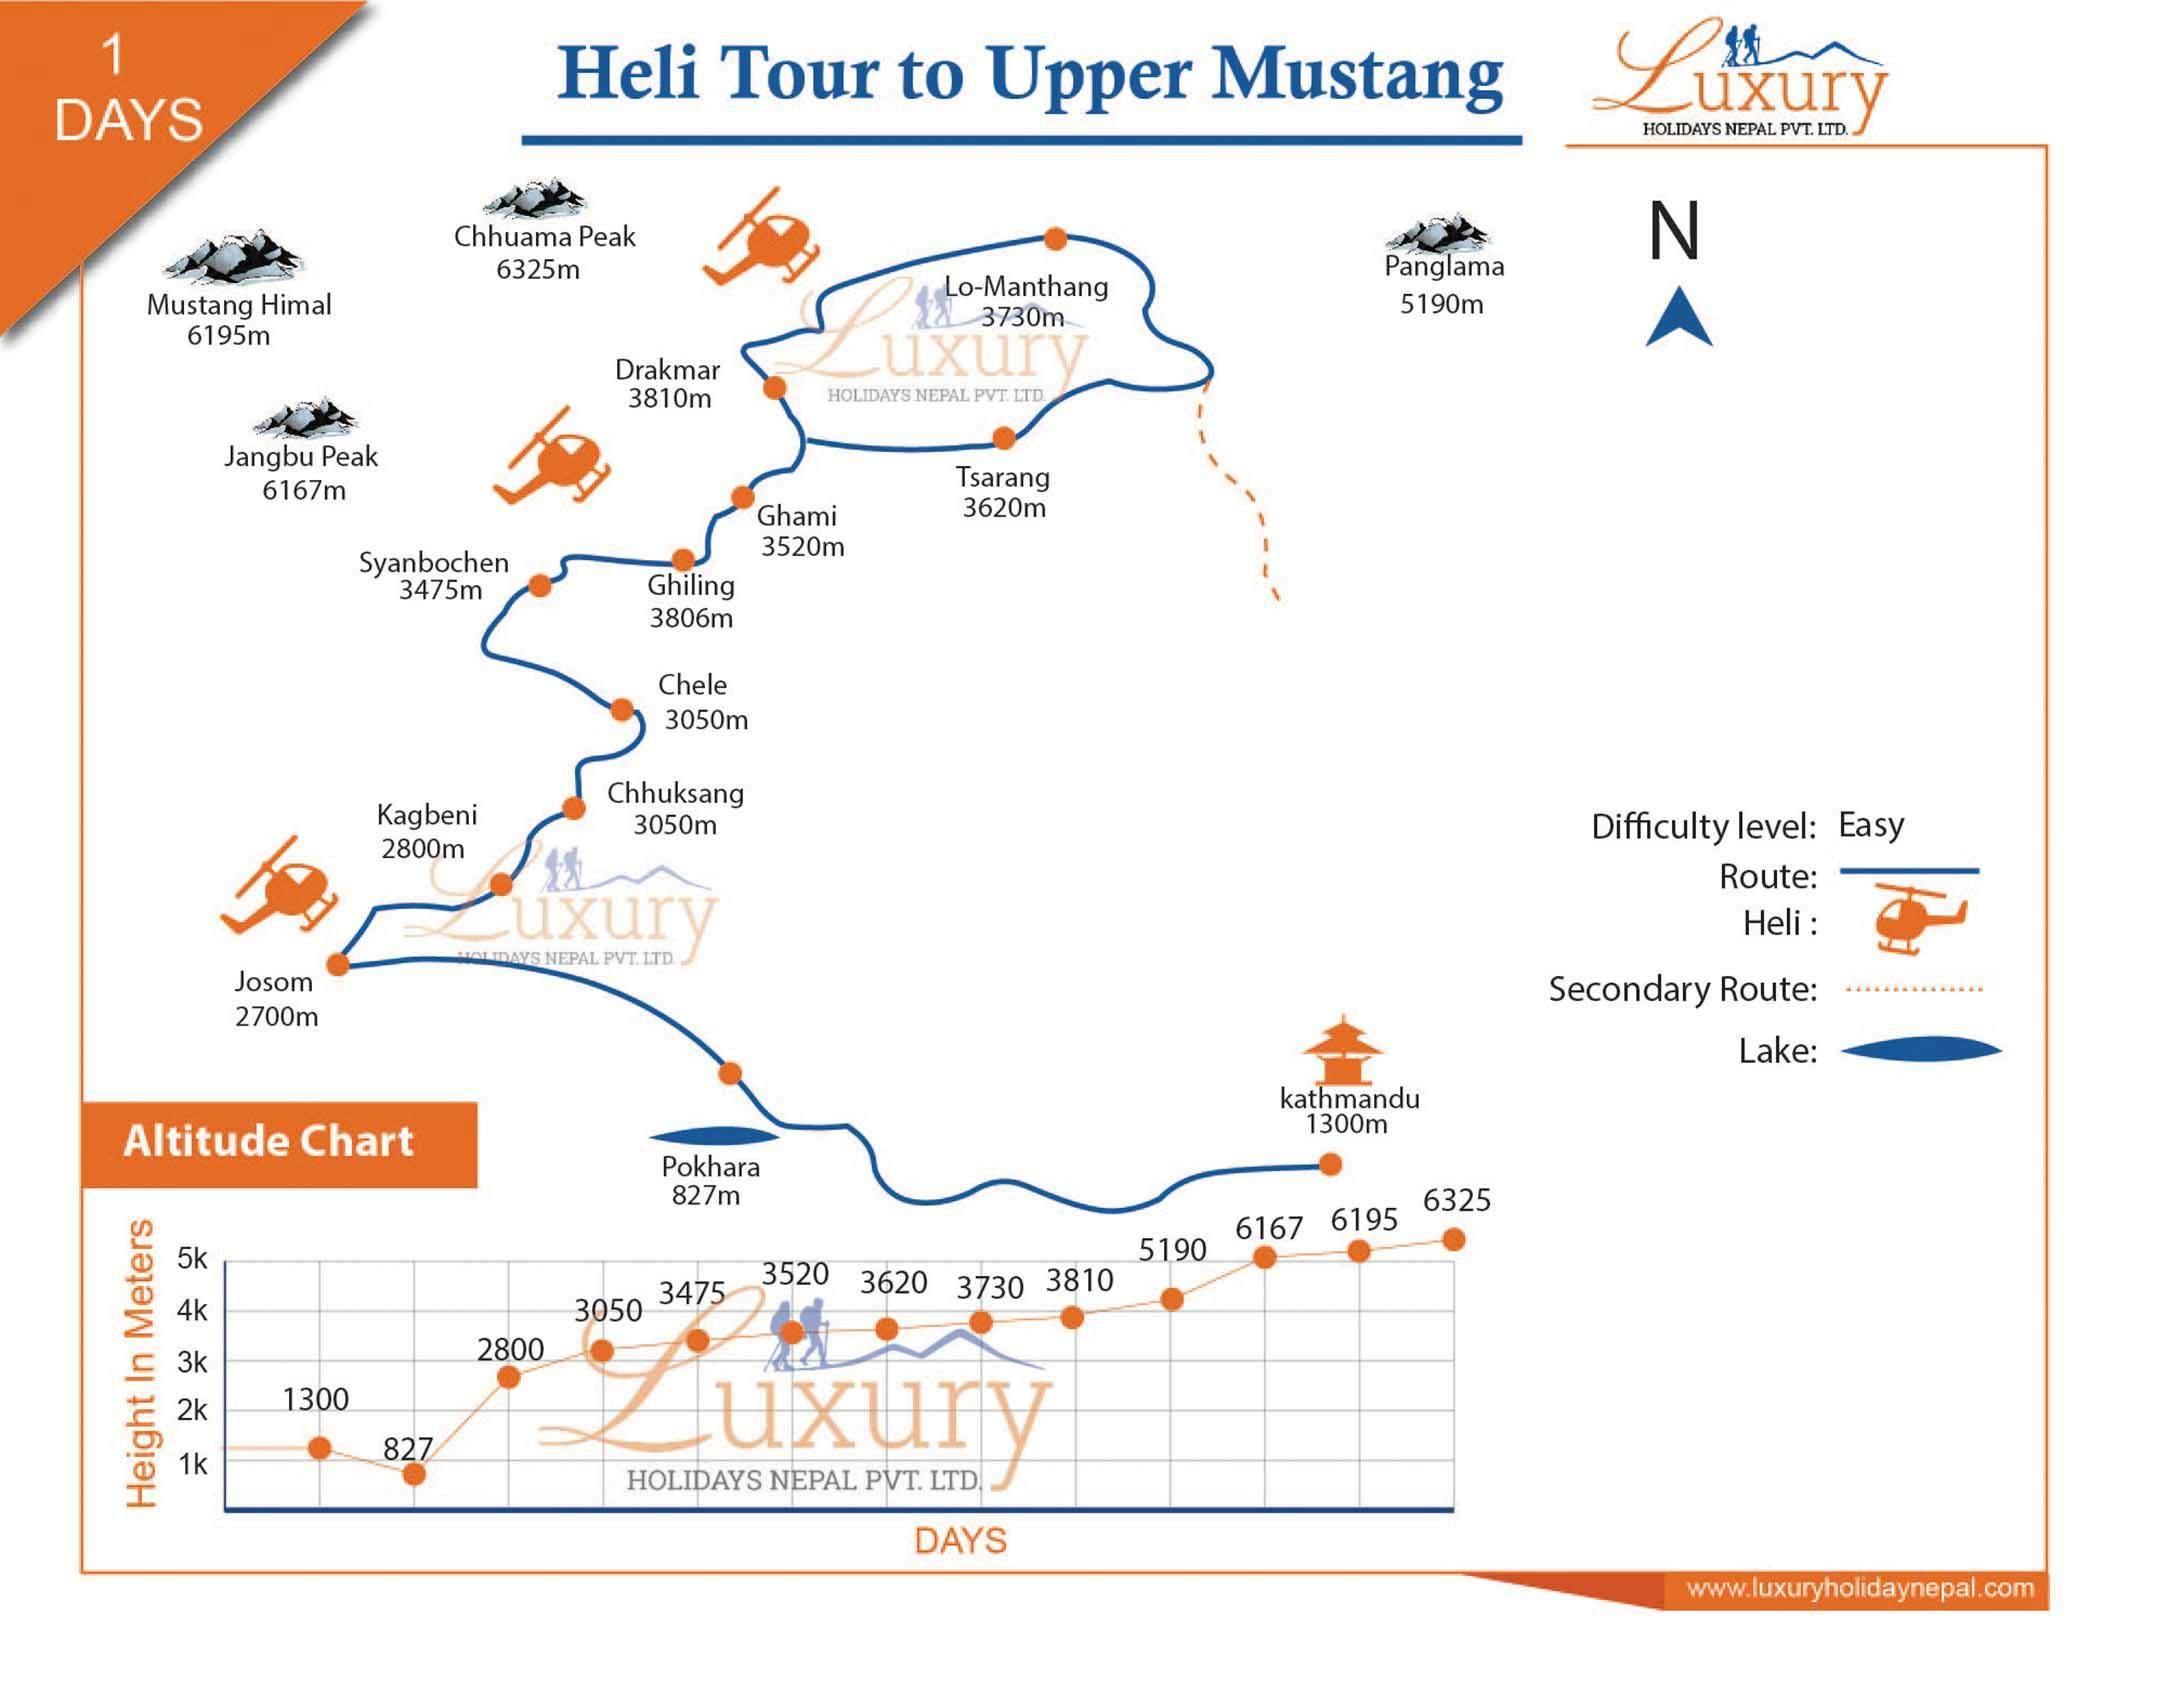 Upper Mustang Helicopter TourMap